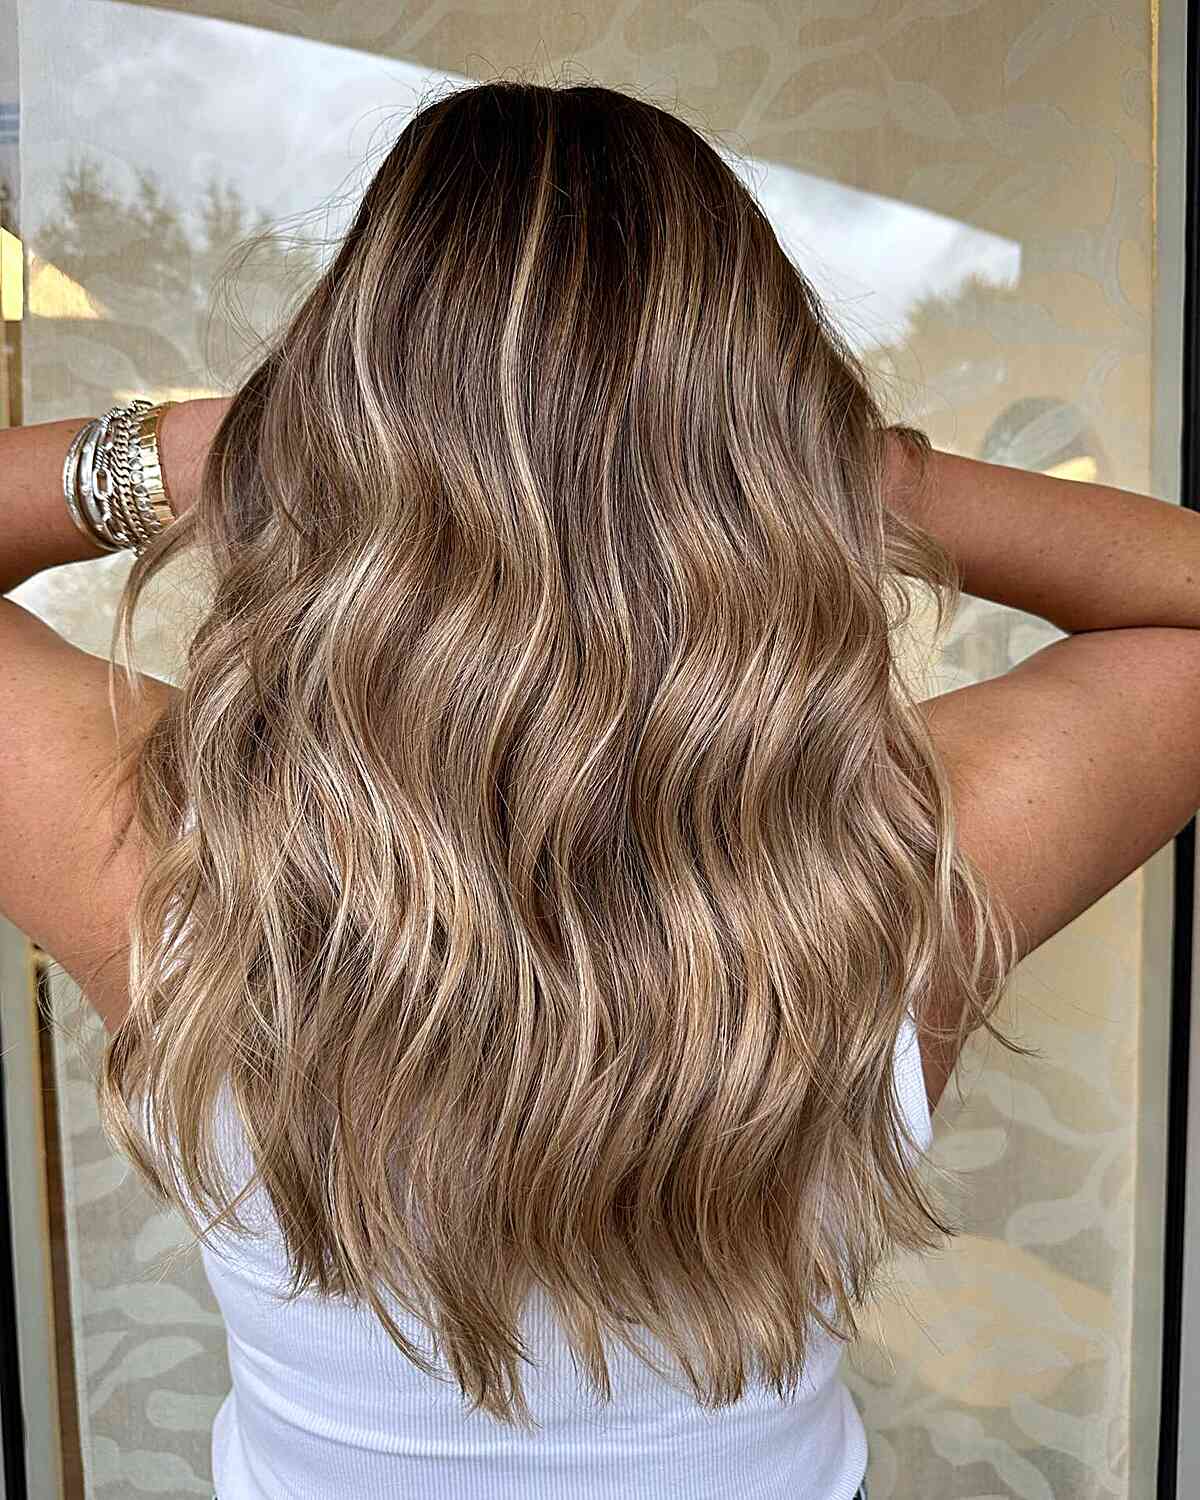 Long Light Bronde Hair with Loose Waves